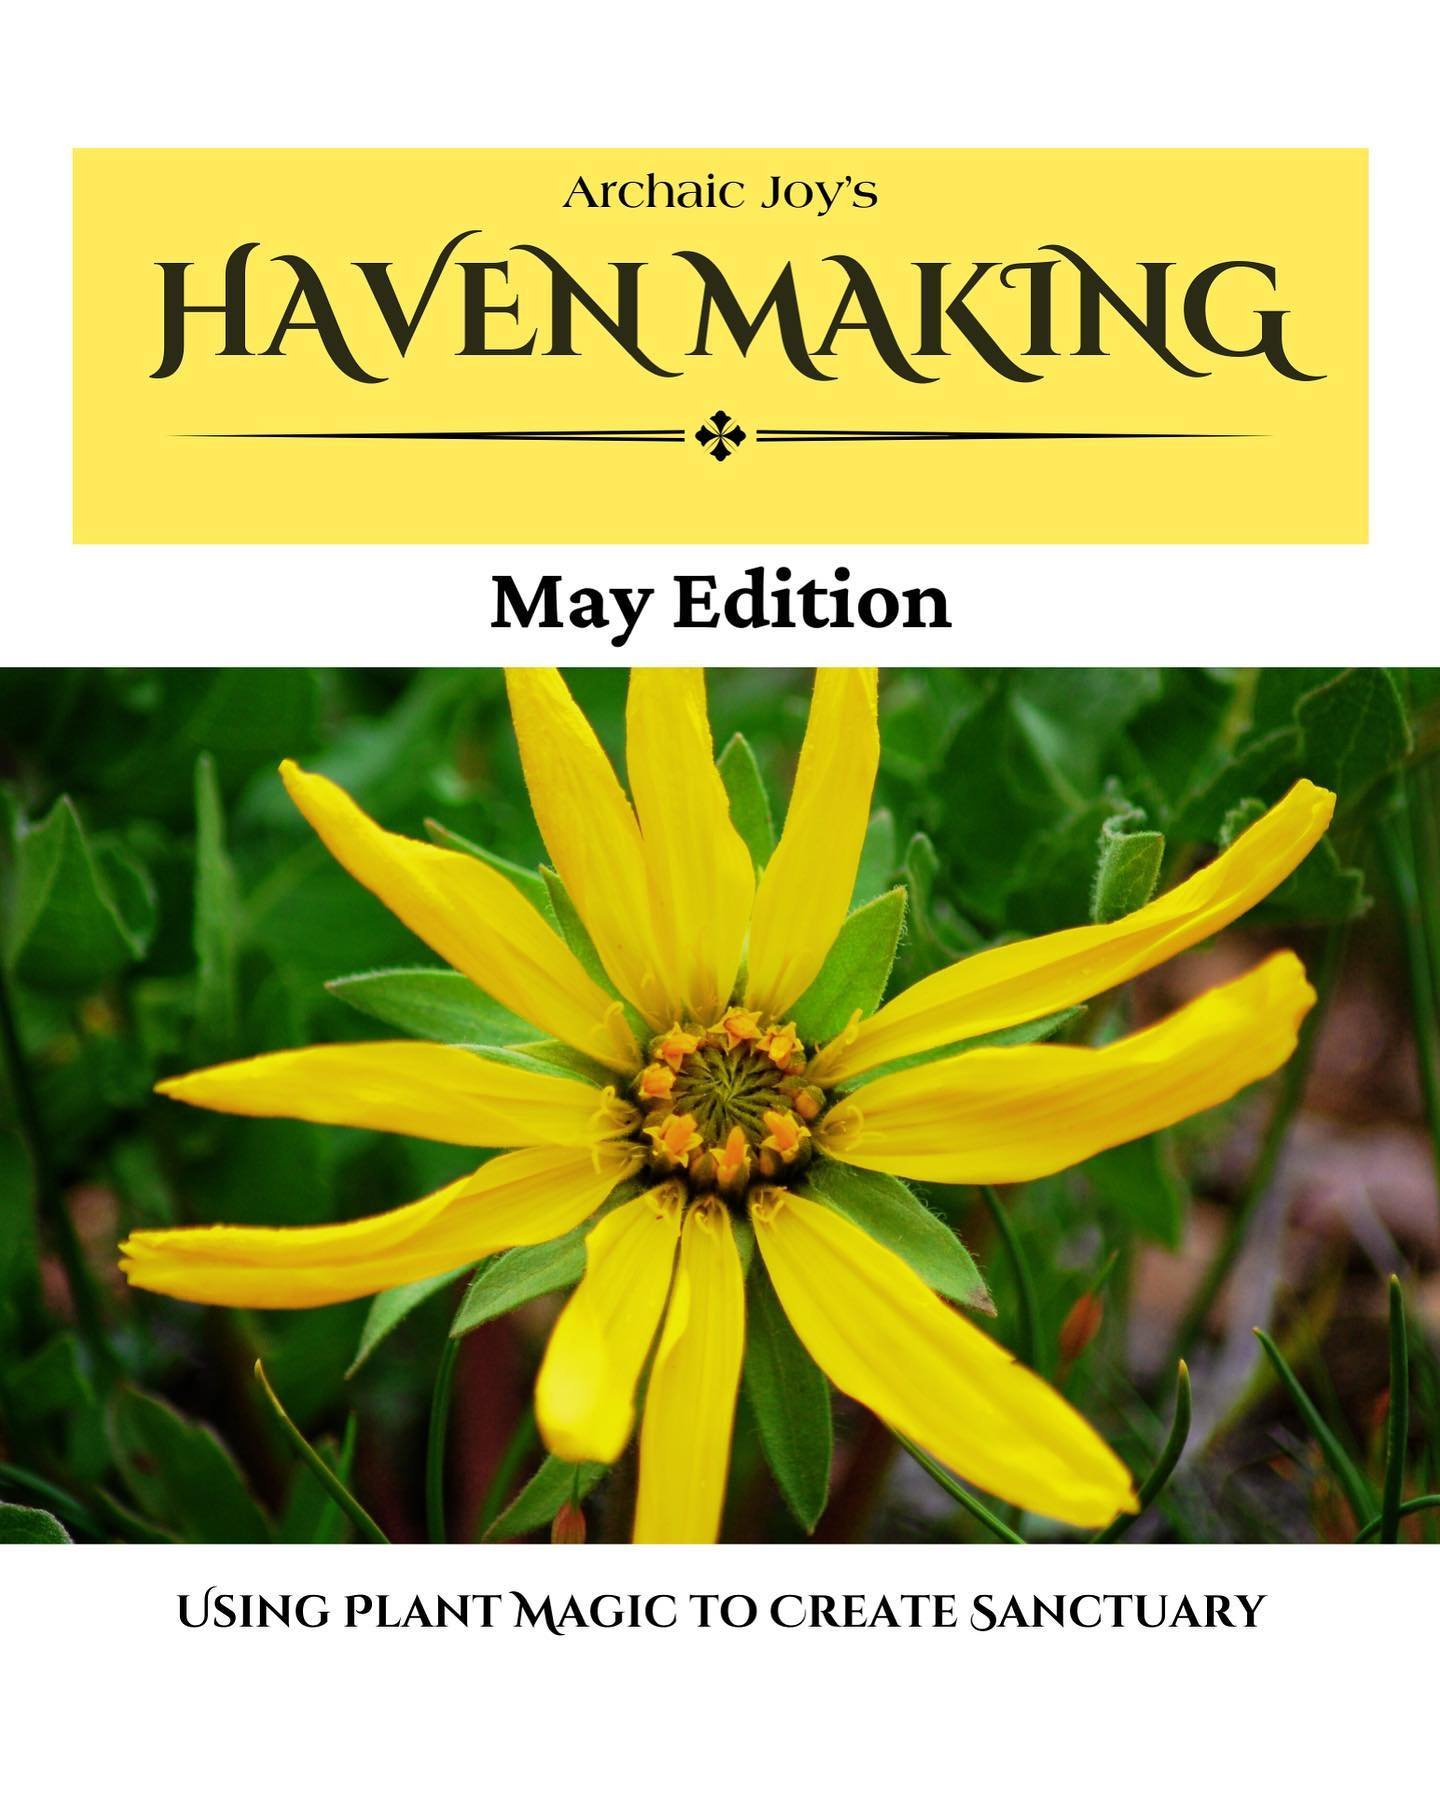 The May edition of Haven Making is out! 

#ethicalwildharvest #plantmedicine #organic #gardening #herbalism #folkherbalism #connectingpeople&amp;plants #lilac #elderberryelixir #livingfence #permaculture #plantlove #plantjoy #plantmagic #archaicjoy #